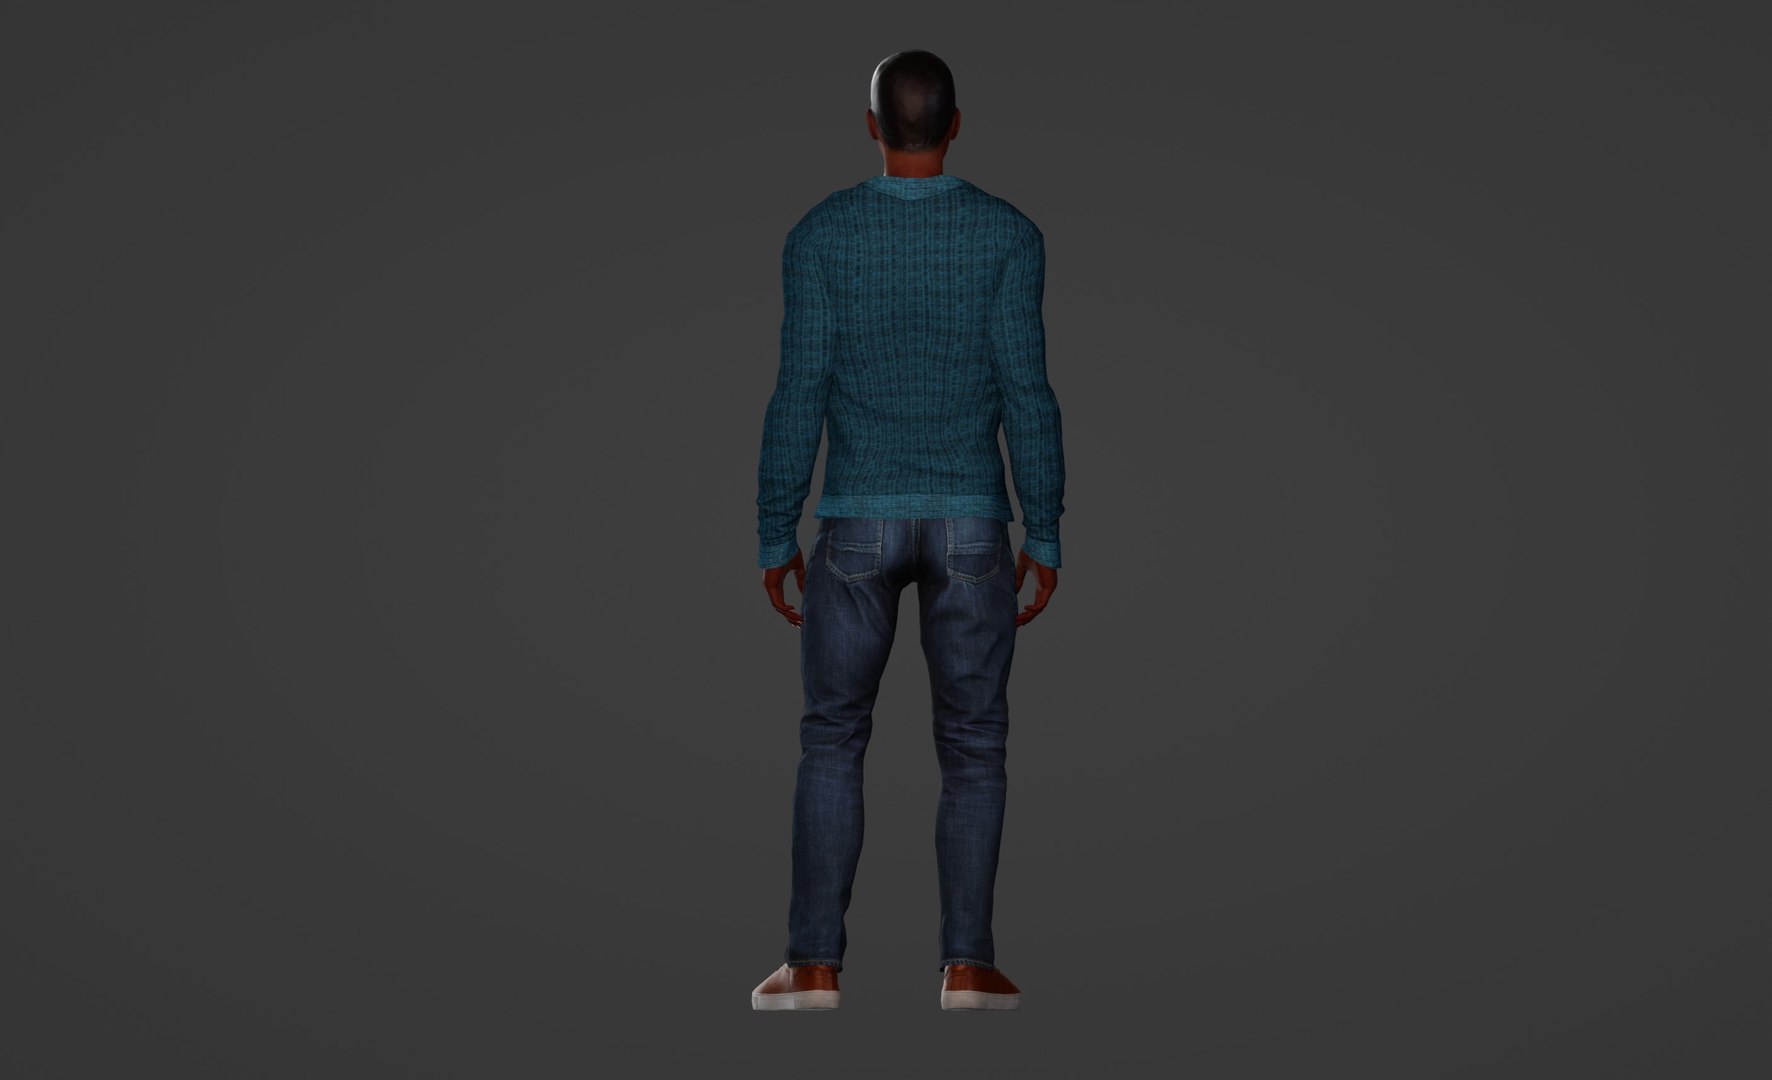 3D Model Of A Stylish Young Man In Blue Cardigan 3D Model - TurboSquid ...